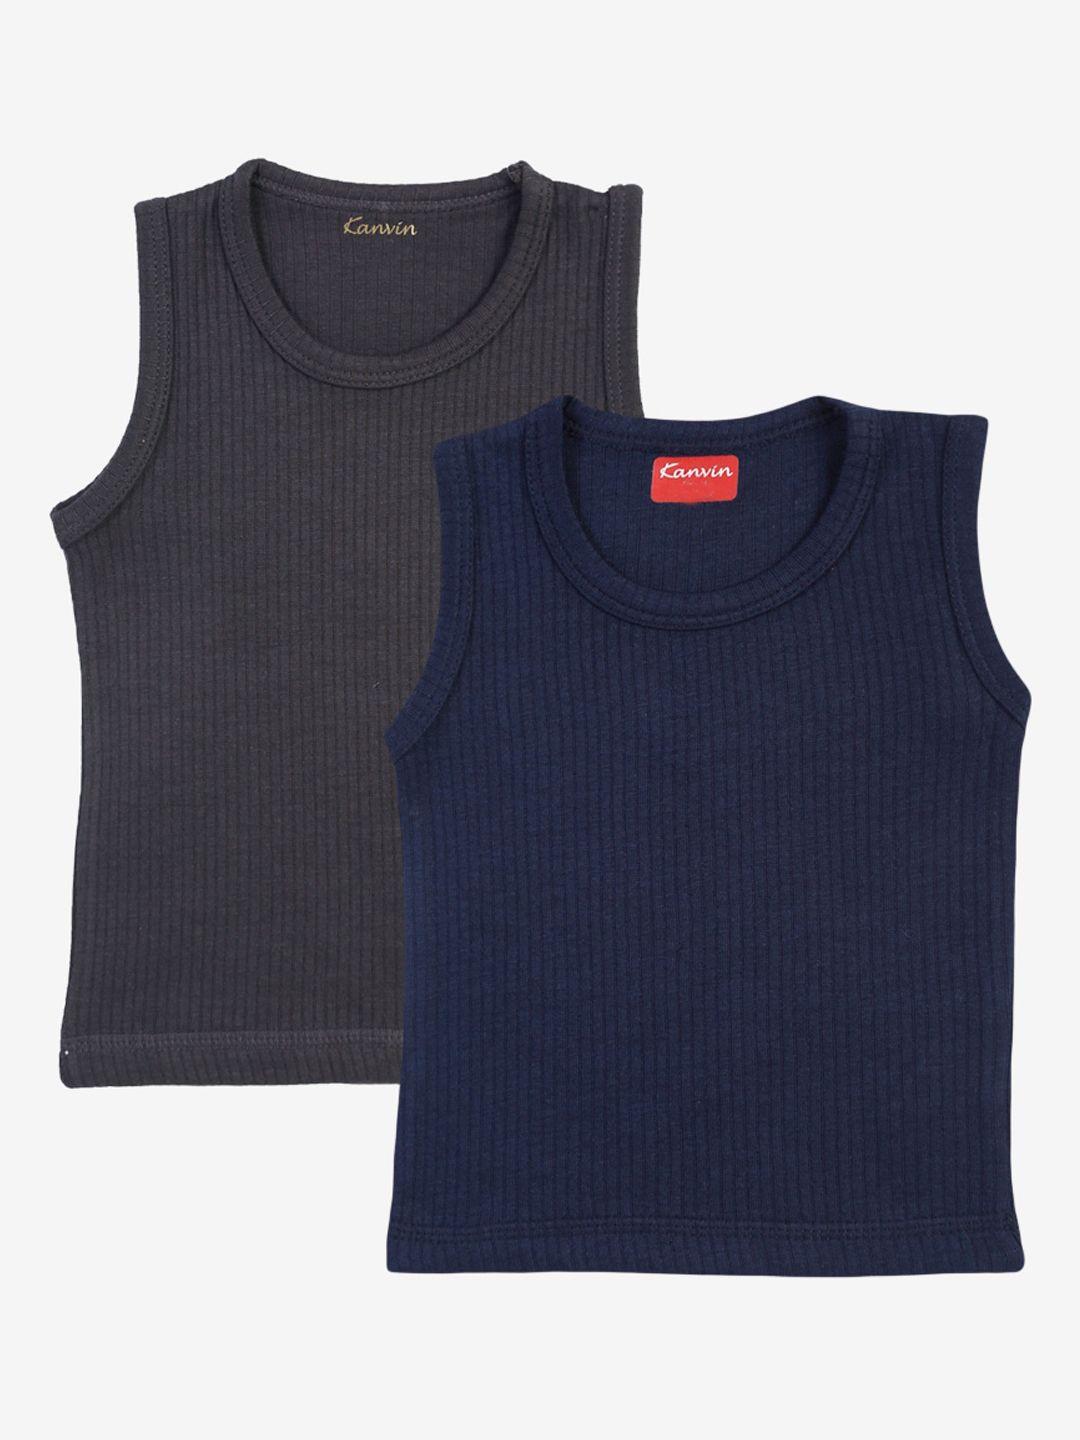 kanvin-boys-charcoal-grey-and-navy-blue-pack-of-2-striped-thermal-tops